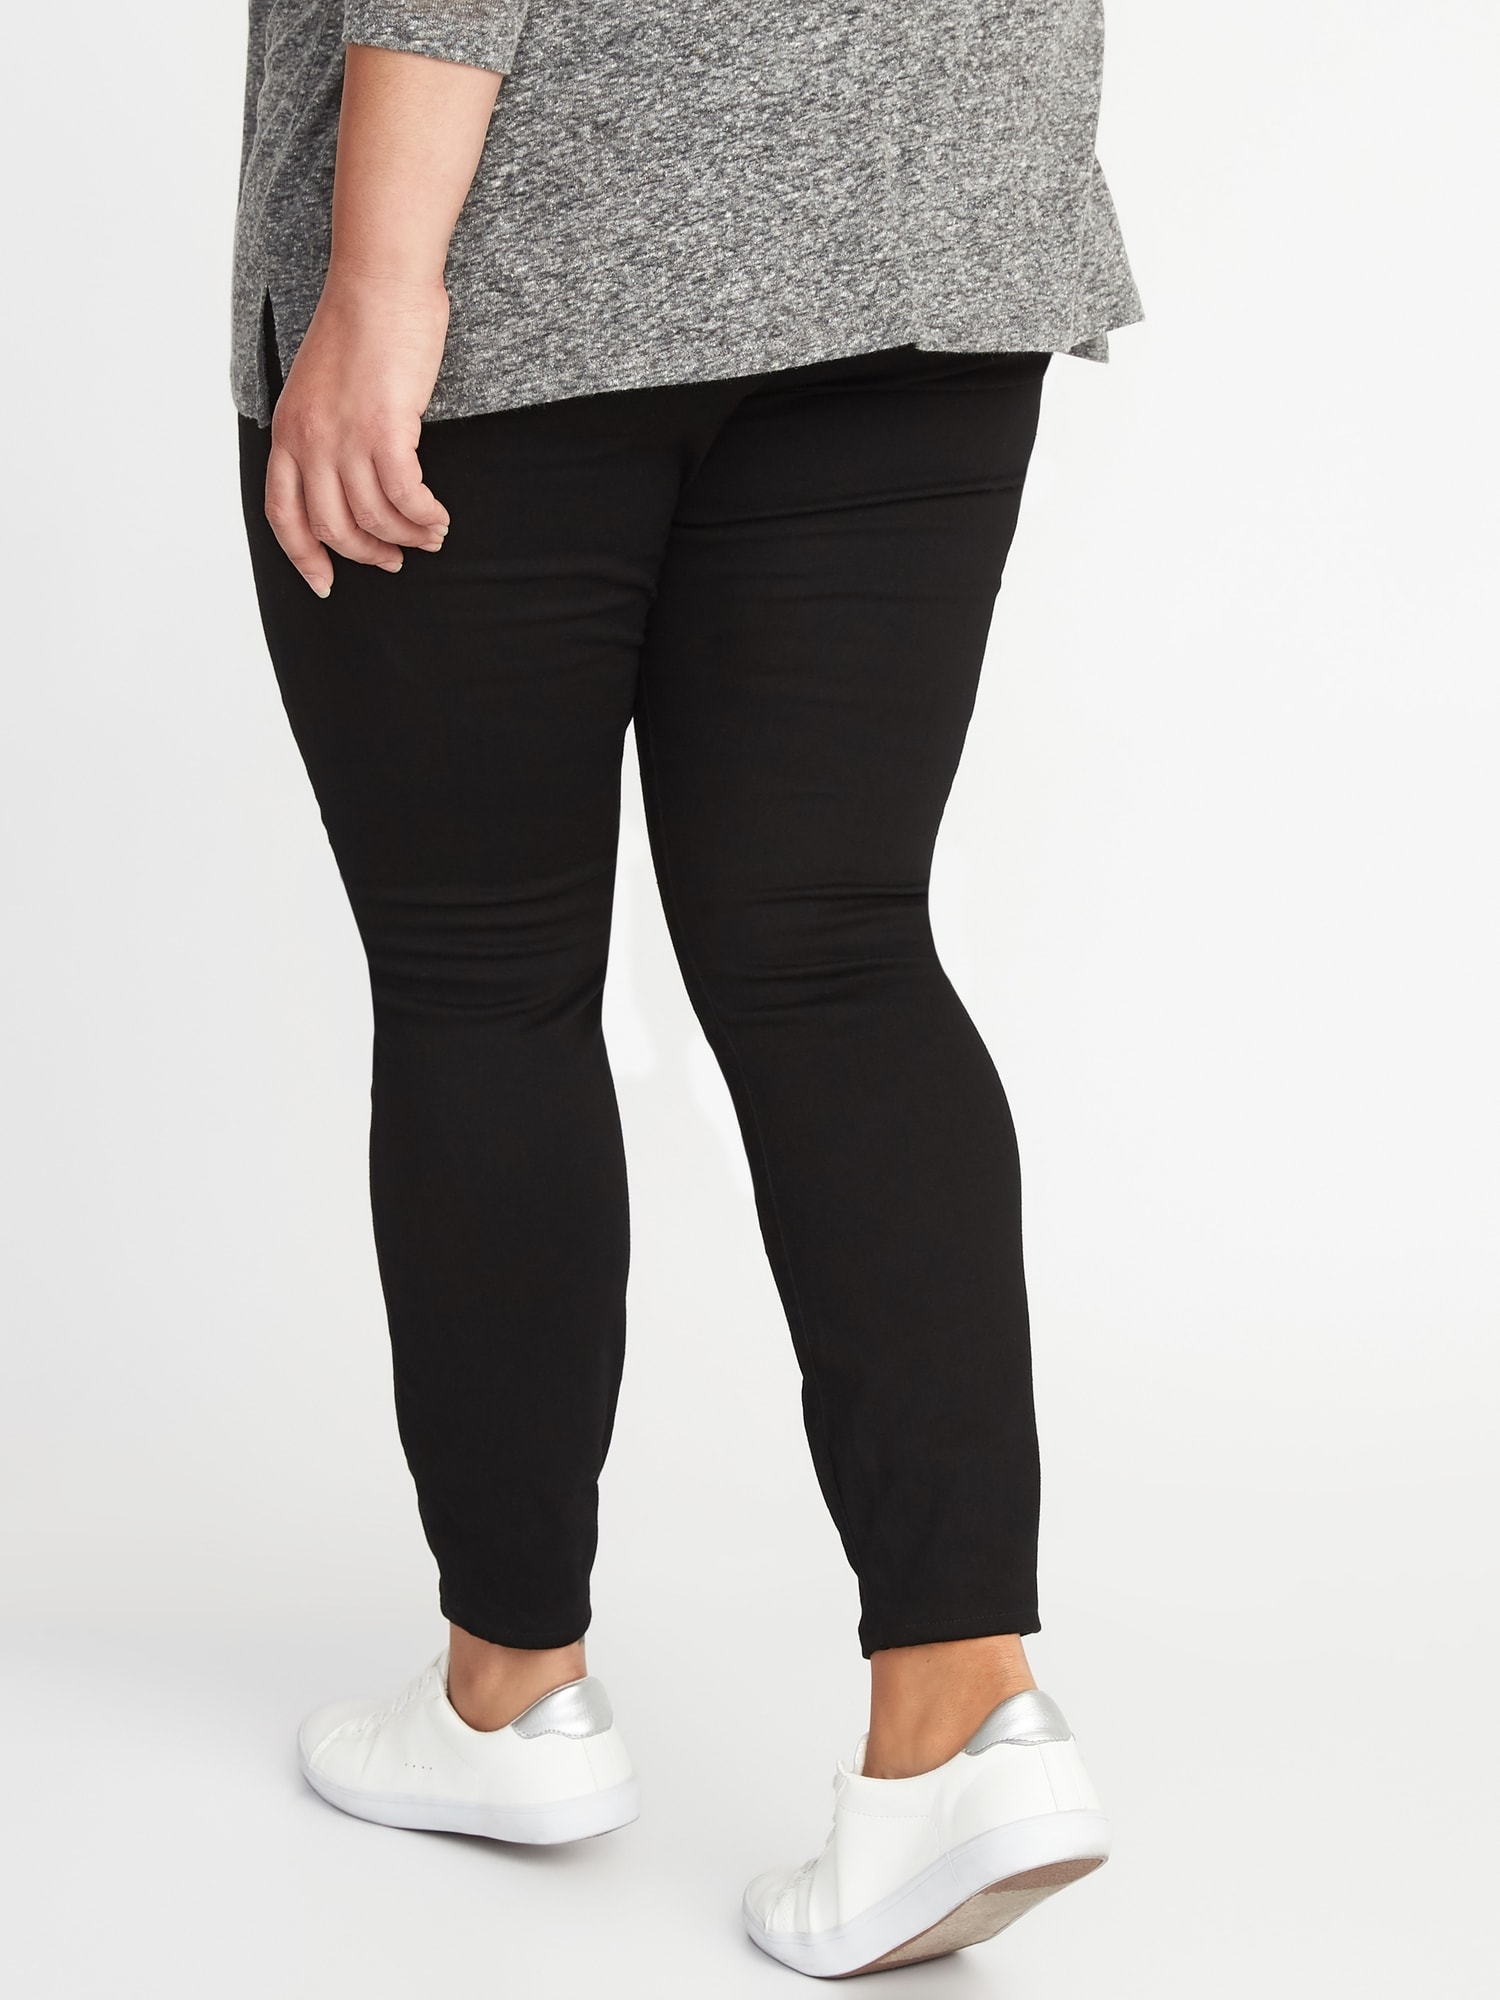 plus size navy jeggings